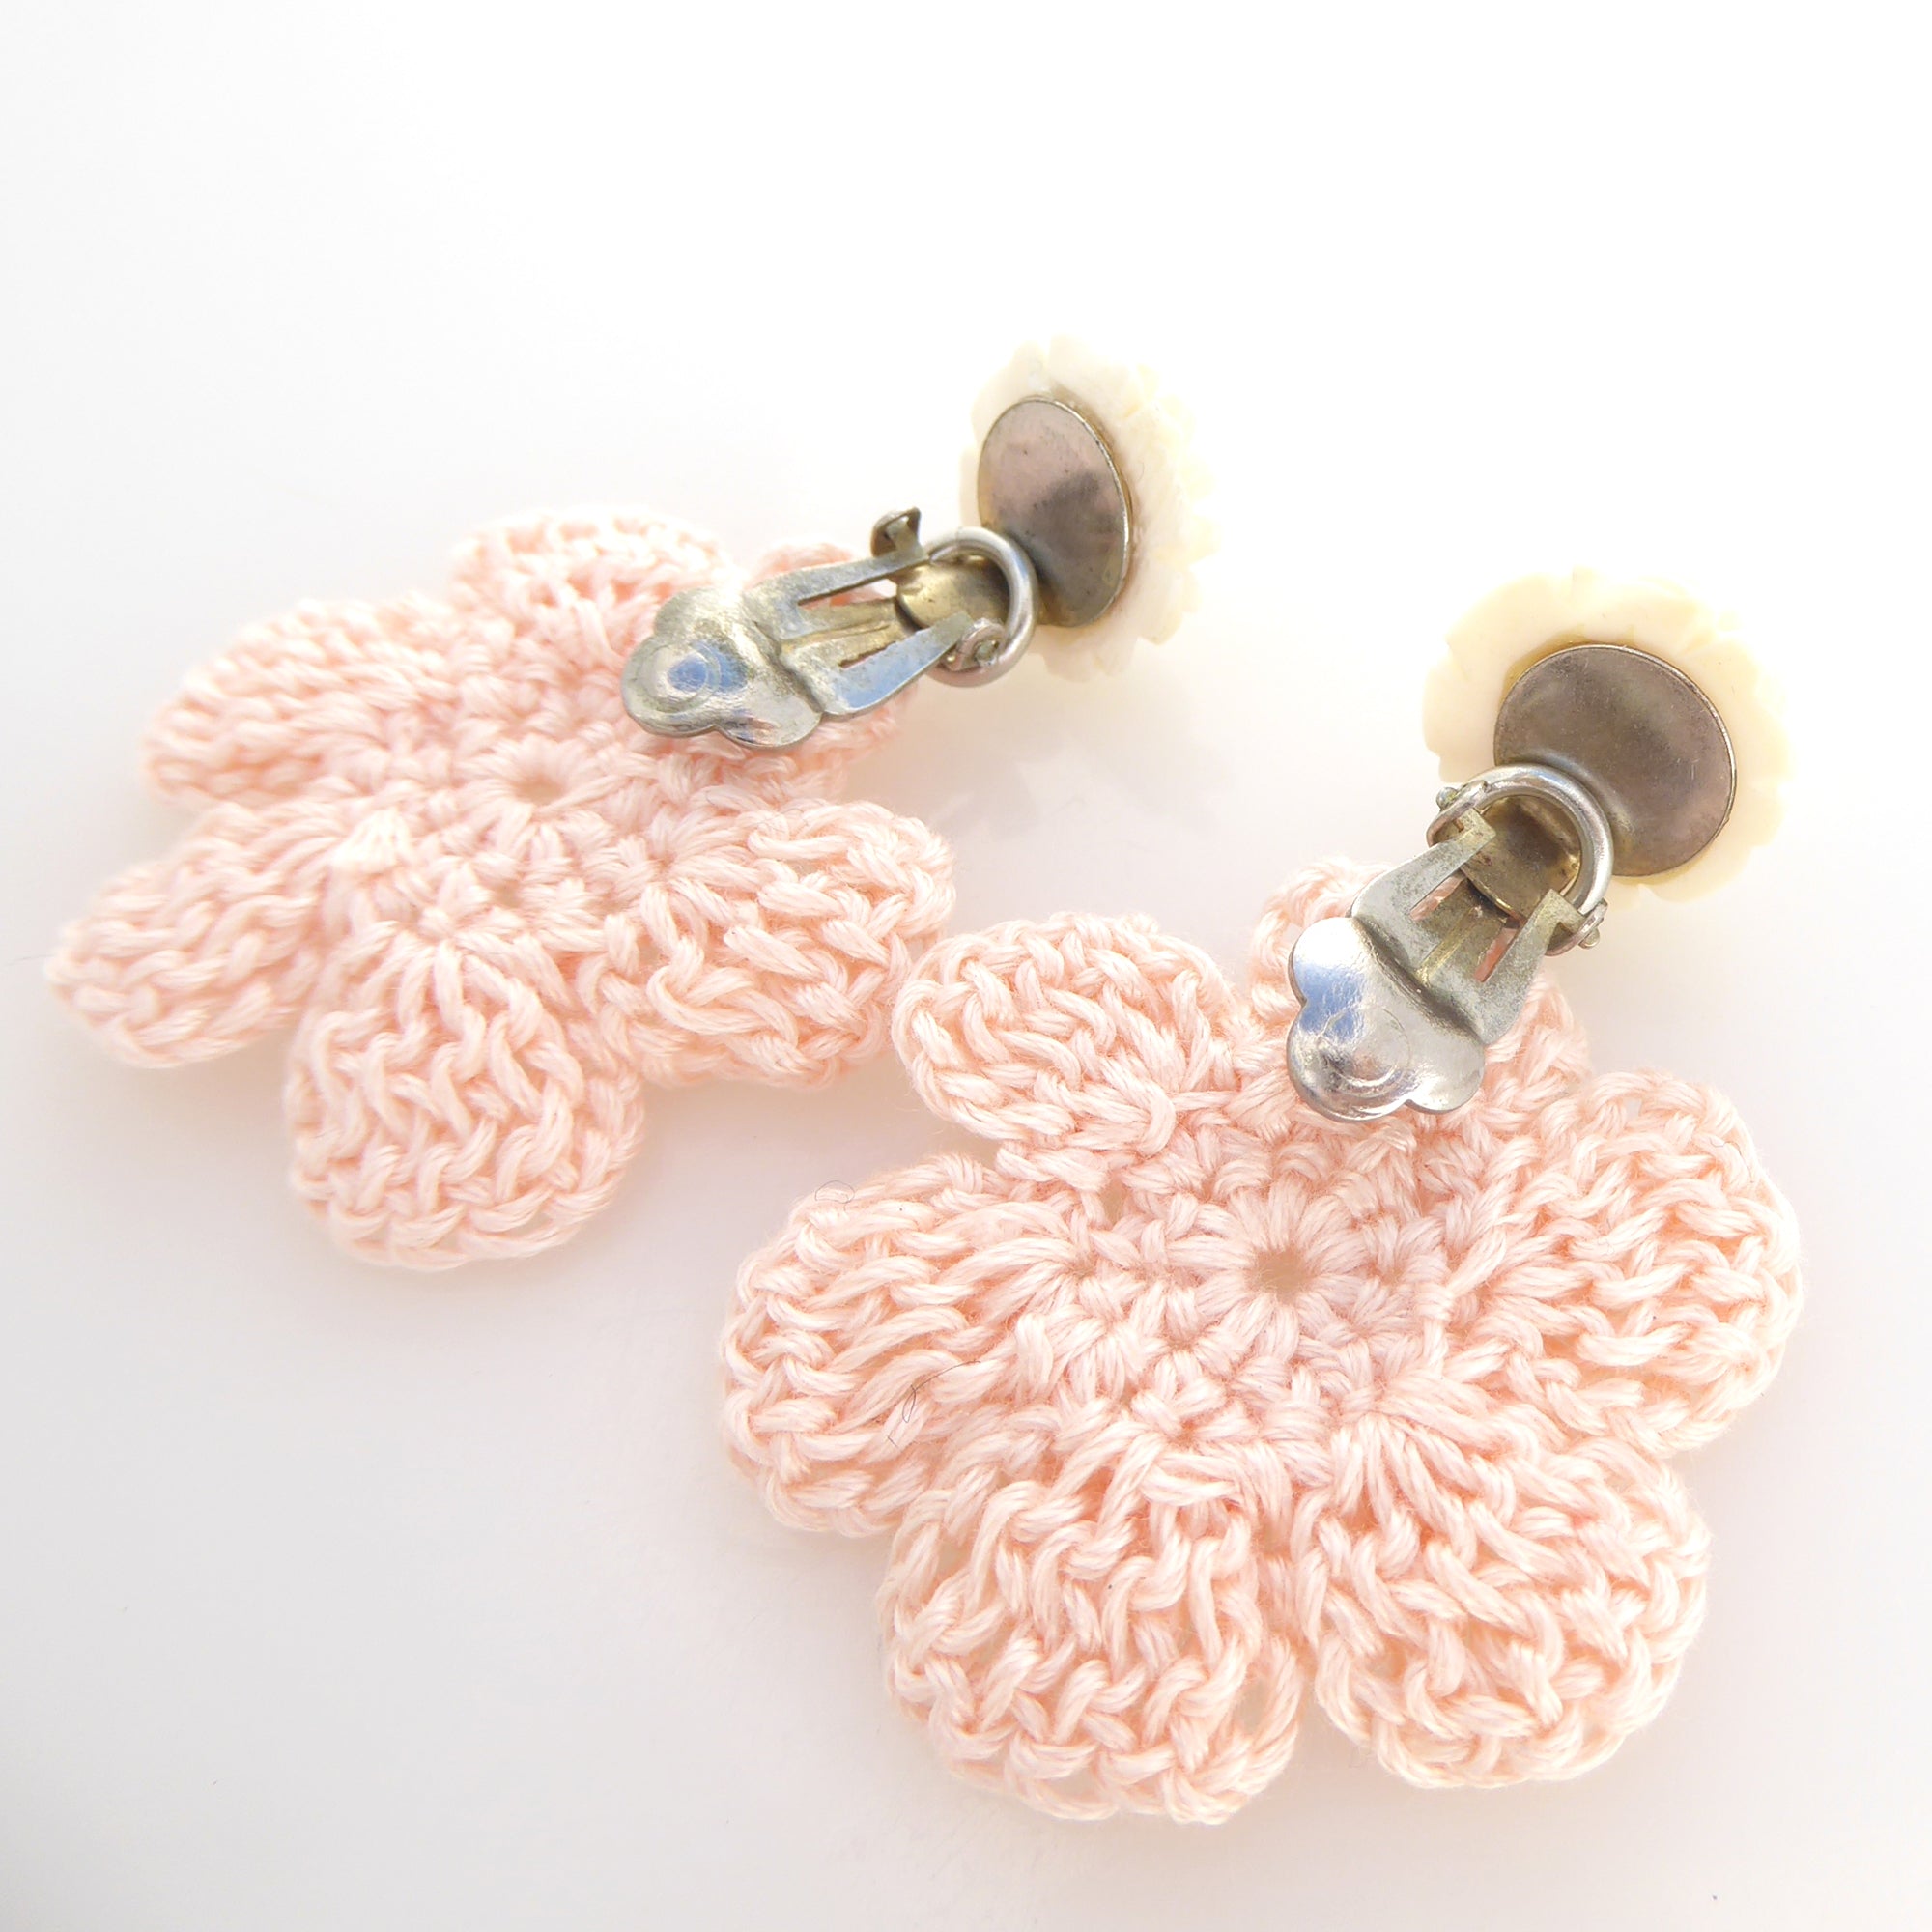 1950s celluloid rose and pale pink crochet flower earrings by Jenny Dayco 6